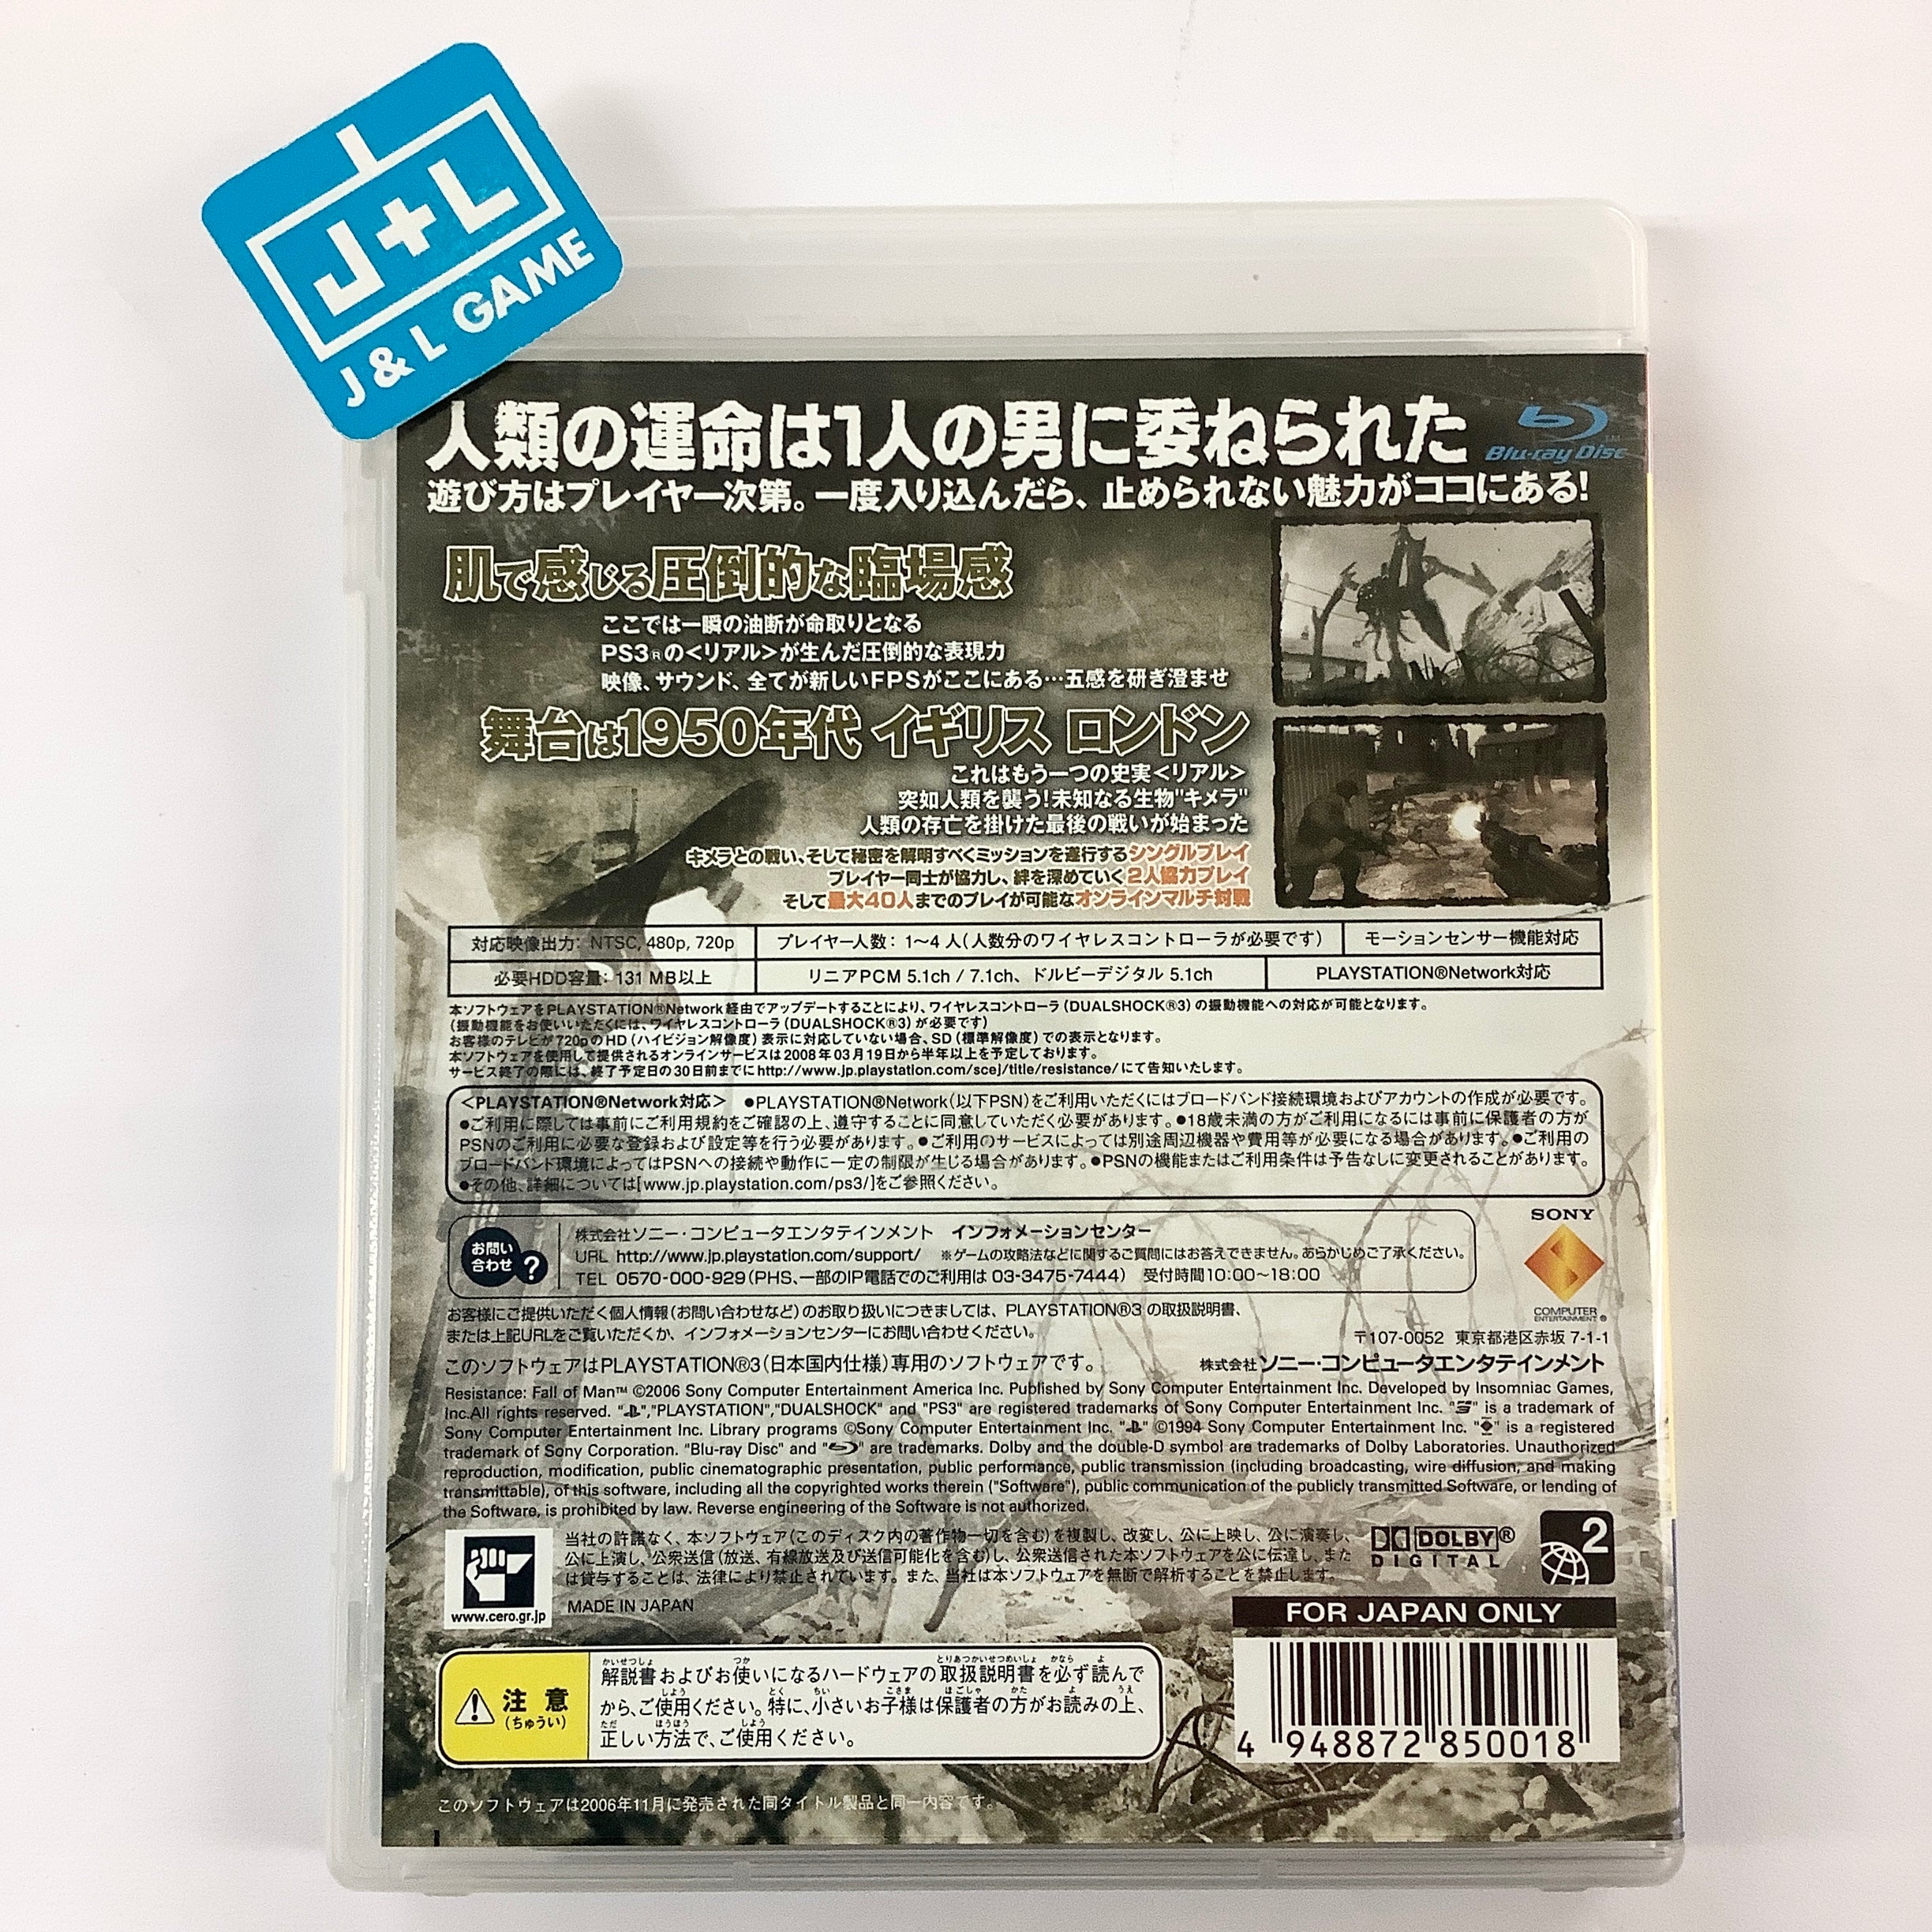 Resistance: Jinrui Botsuraku no Hi (PlayStation 3 the Best) - (PS3) PlayStation 3 [Pre-Owned] (Japanese Import) Video Games SCEI   